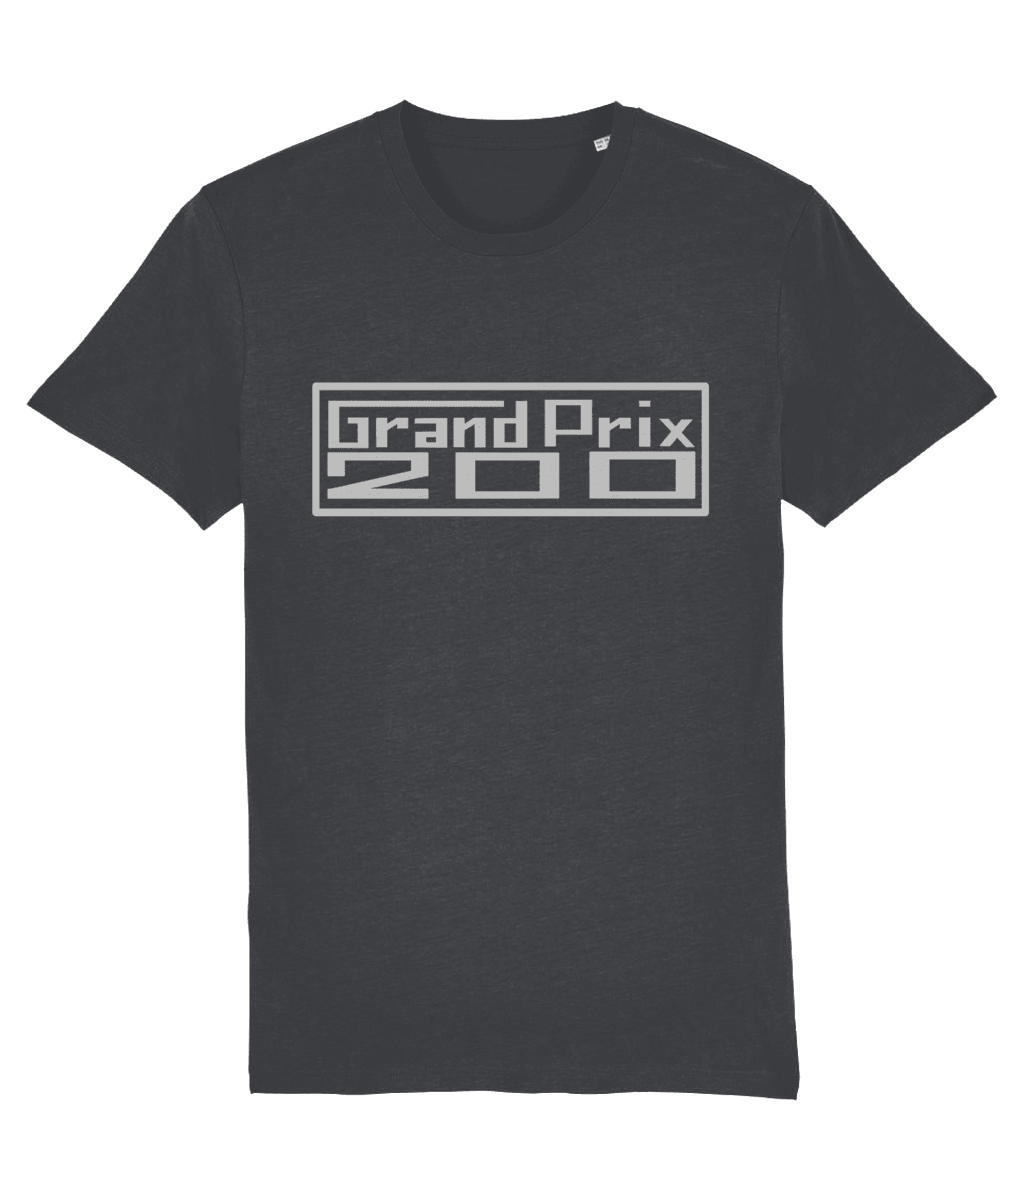 GRAND PRIX 200: T-Shirt Inspired by Classic Lambretta Scooters (Silver Badge with 3 Colour Options) Small to 4XL - SOUND IS COLOUR